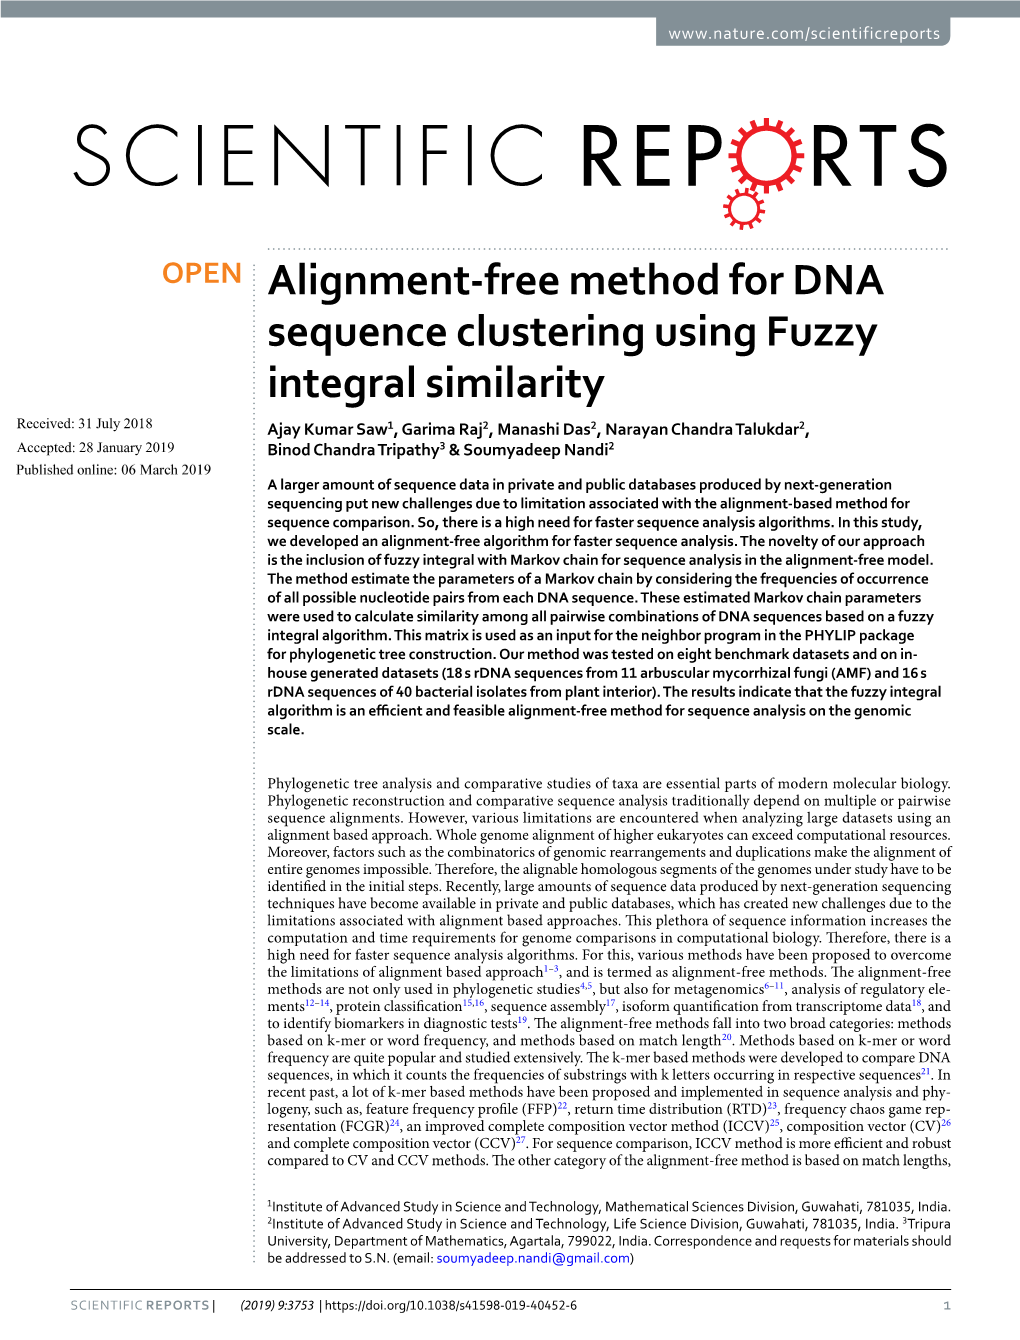 Alignment-Free Method for DNA Sequence Clustering Using Fuzzy Integral Similarity